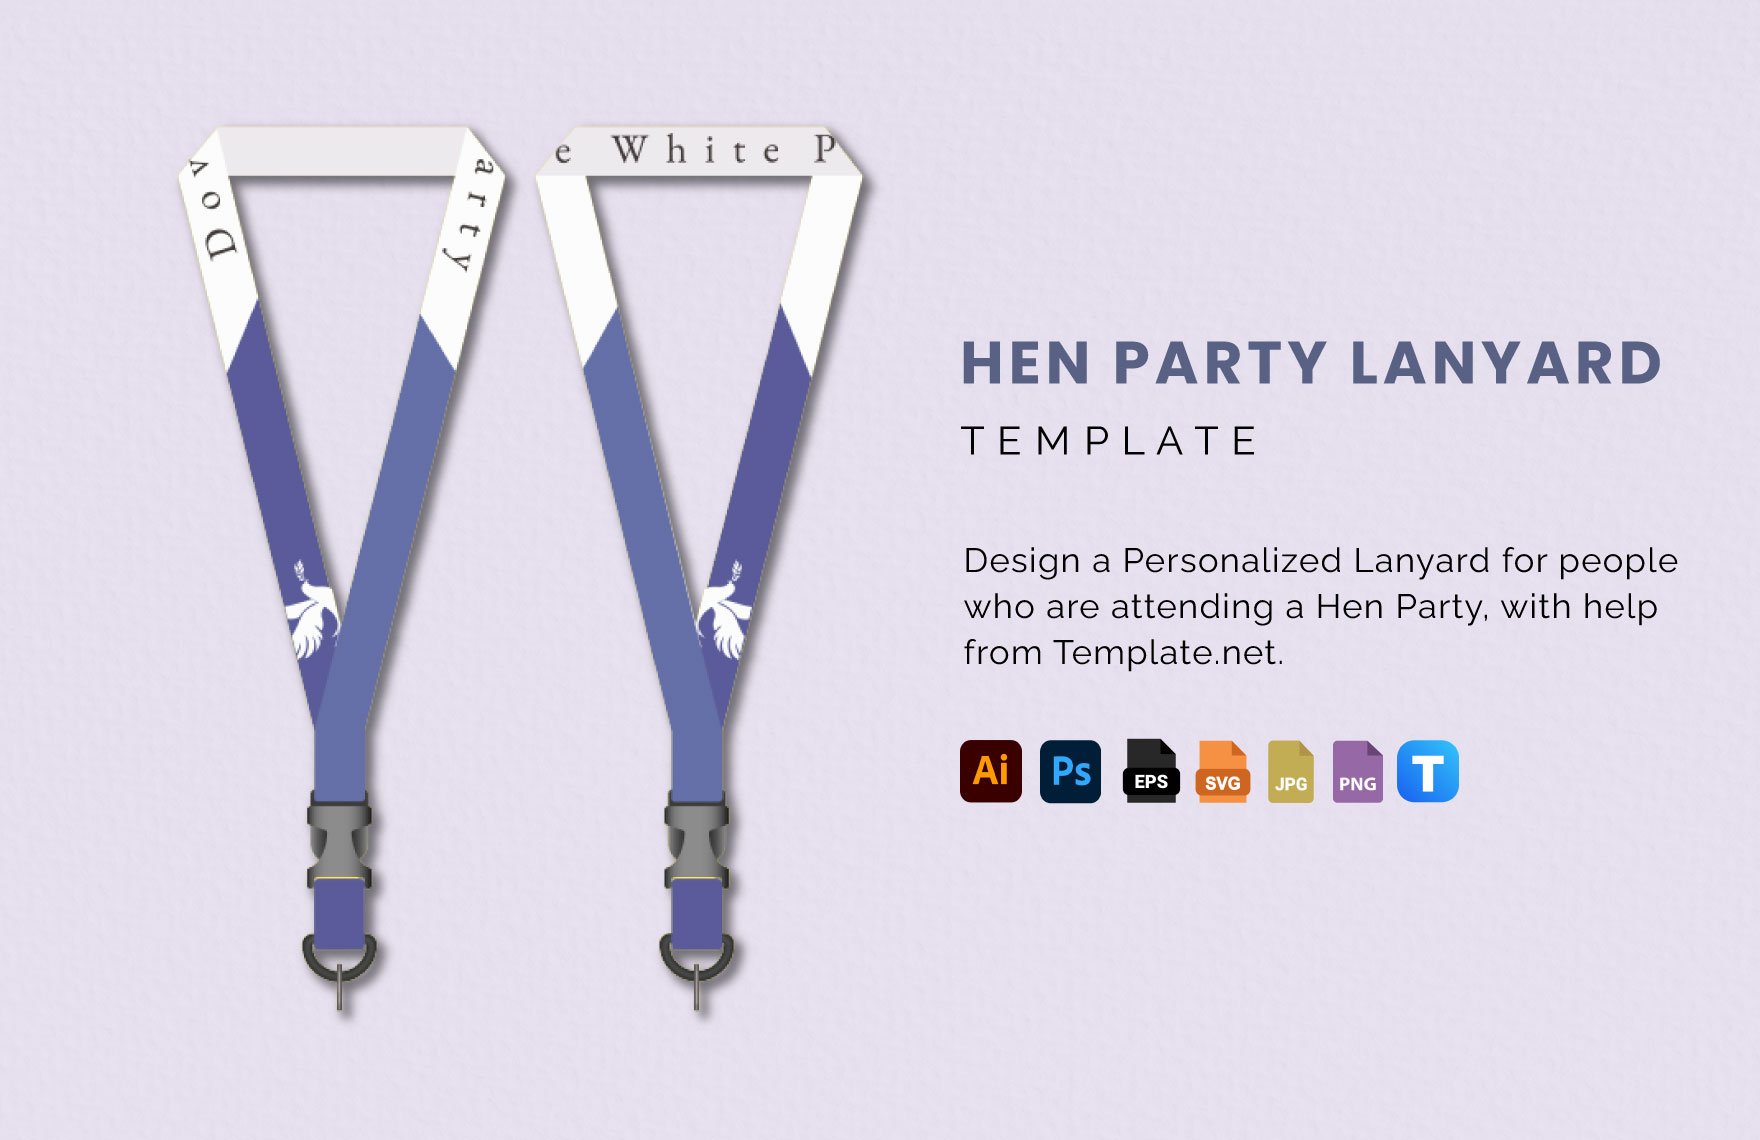 Hen Party Lanyard Template